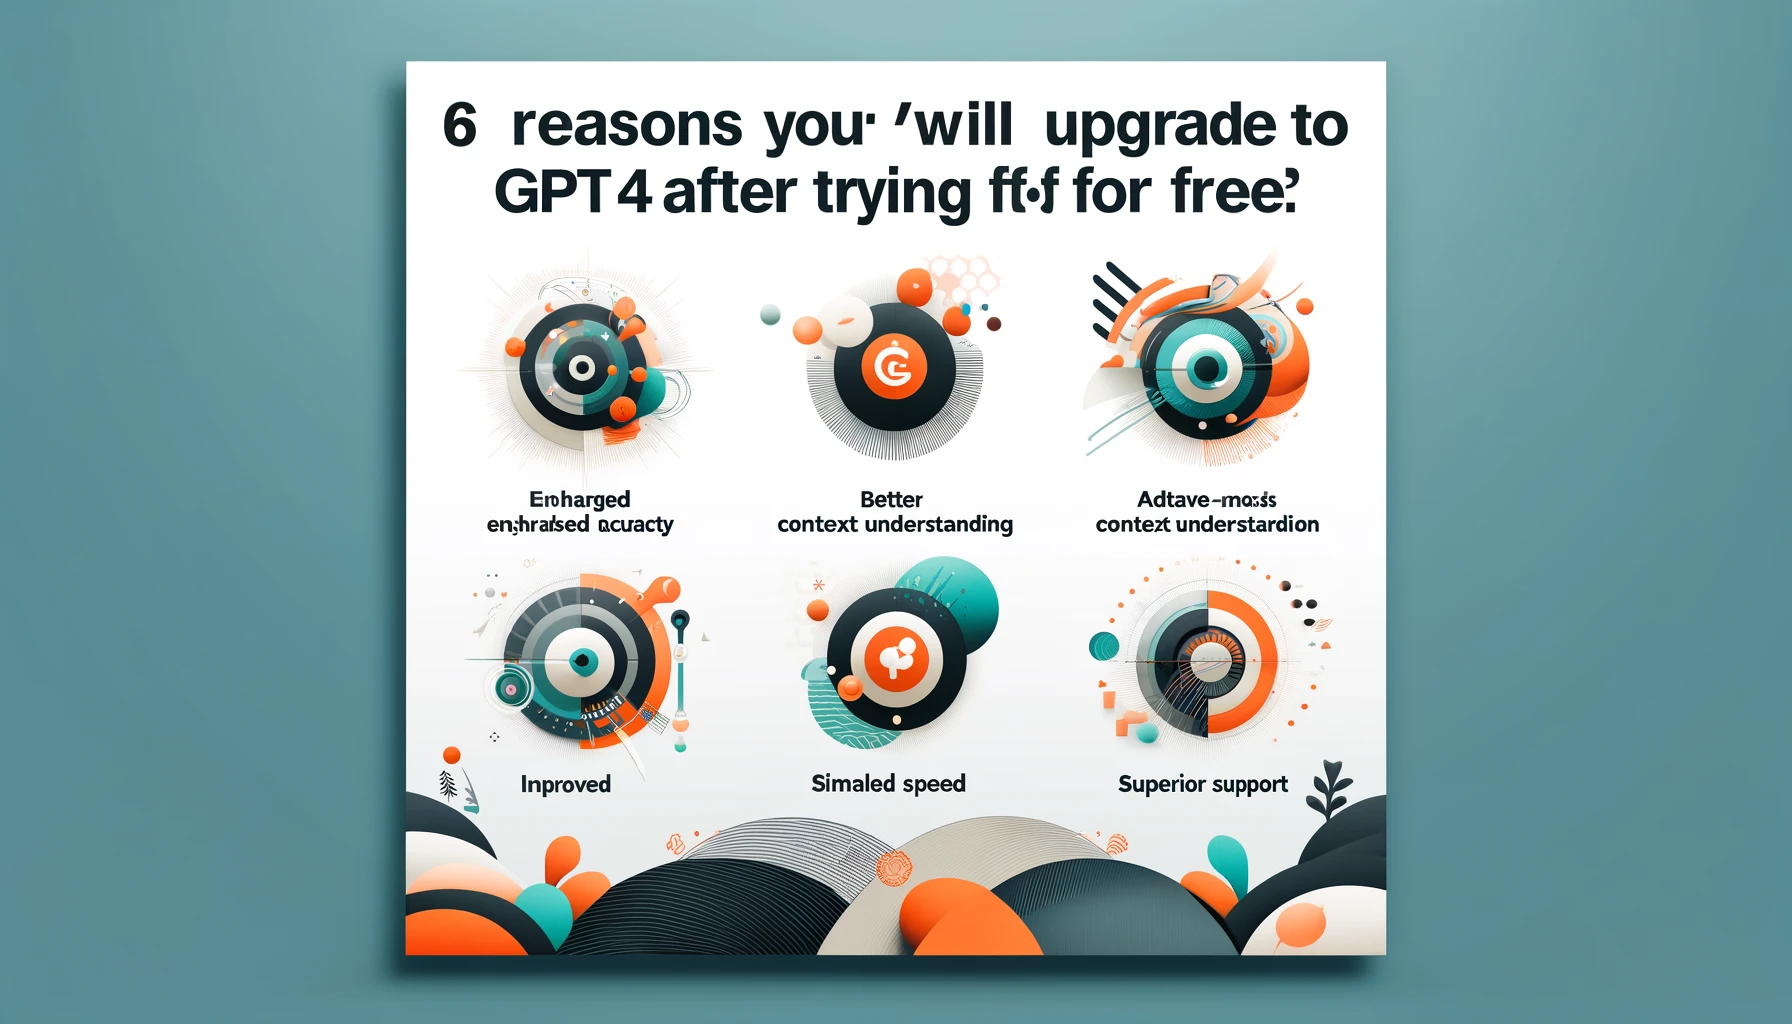 6 Reasons You'll Upgrade to GPT-4 After Trying It for Free